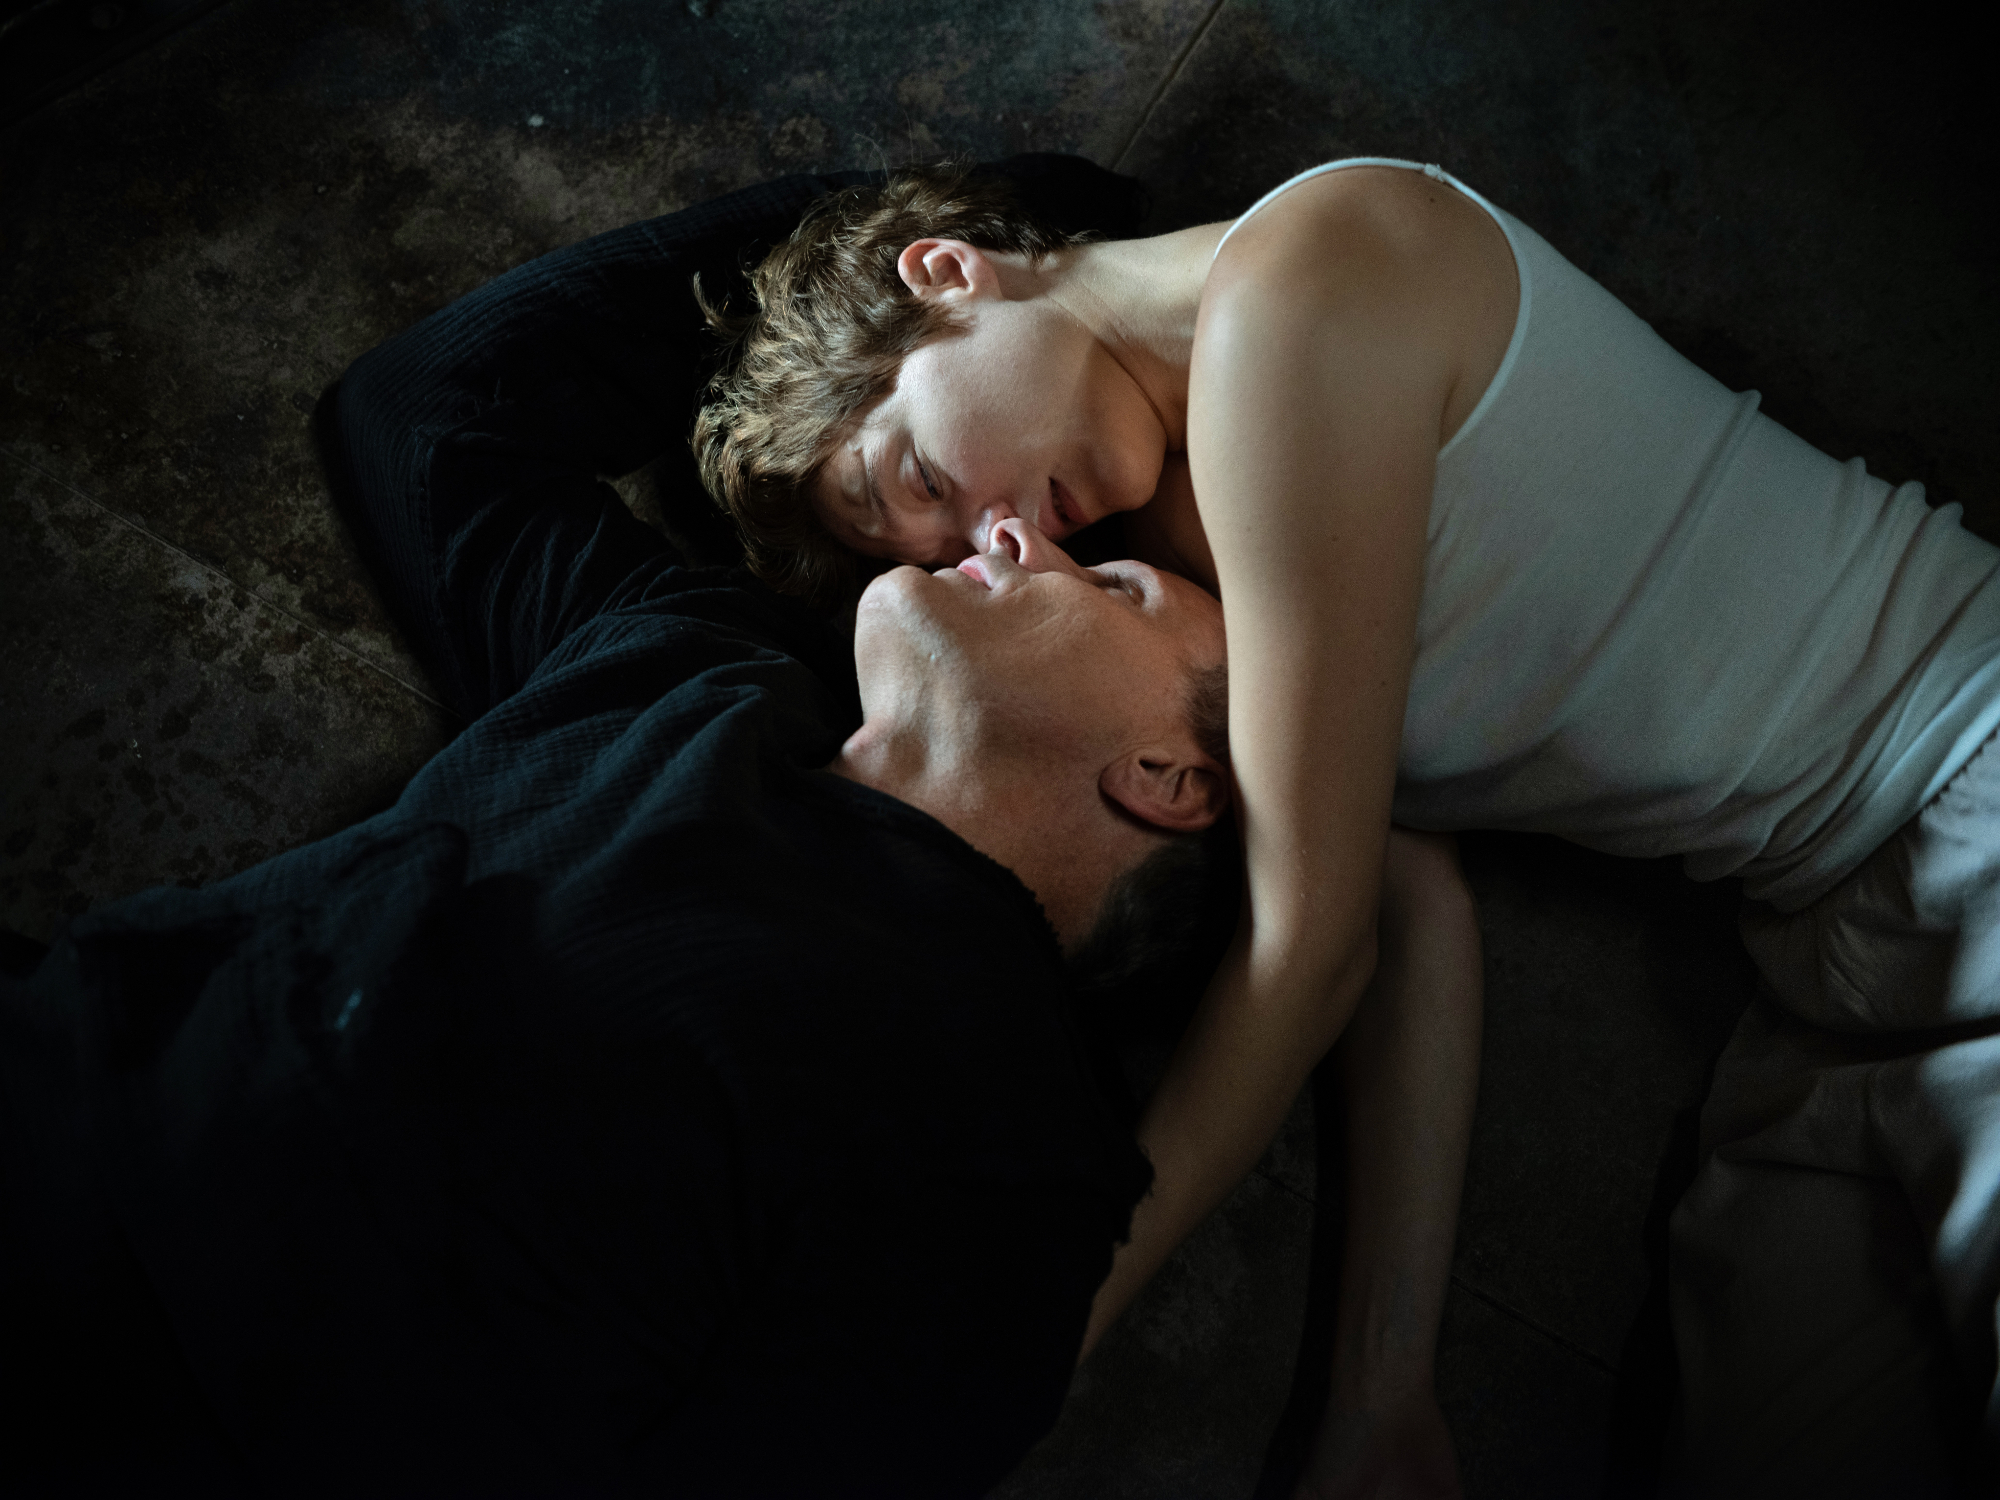 'Crimes of the Future' Viggo Mortensen as Saul Tensen and Léa Seydoux as Caprice embracing each other with Viggo looking upside down on the ground